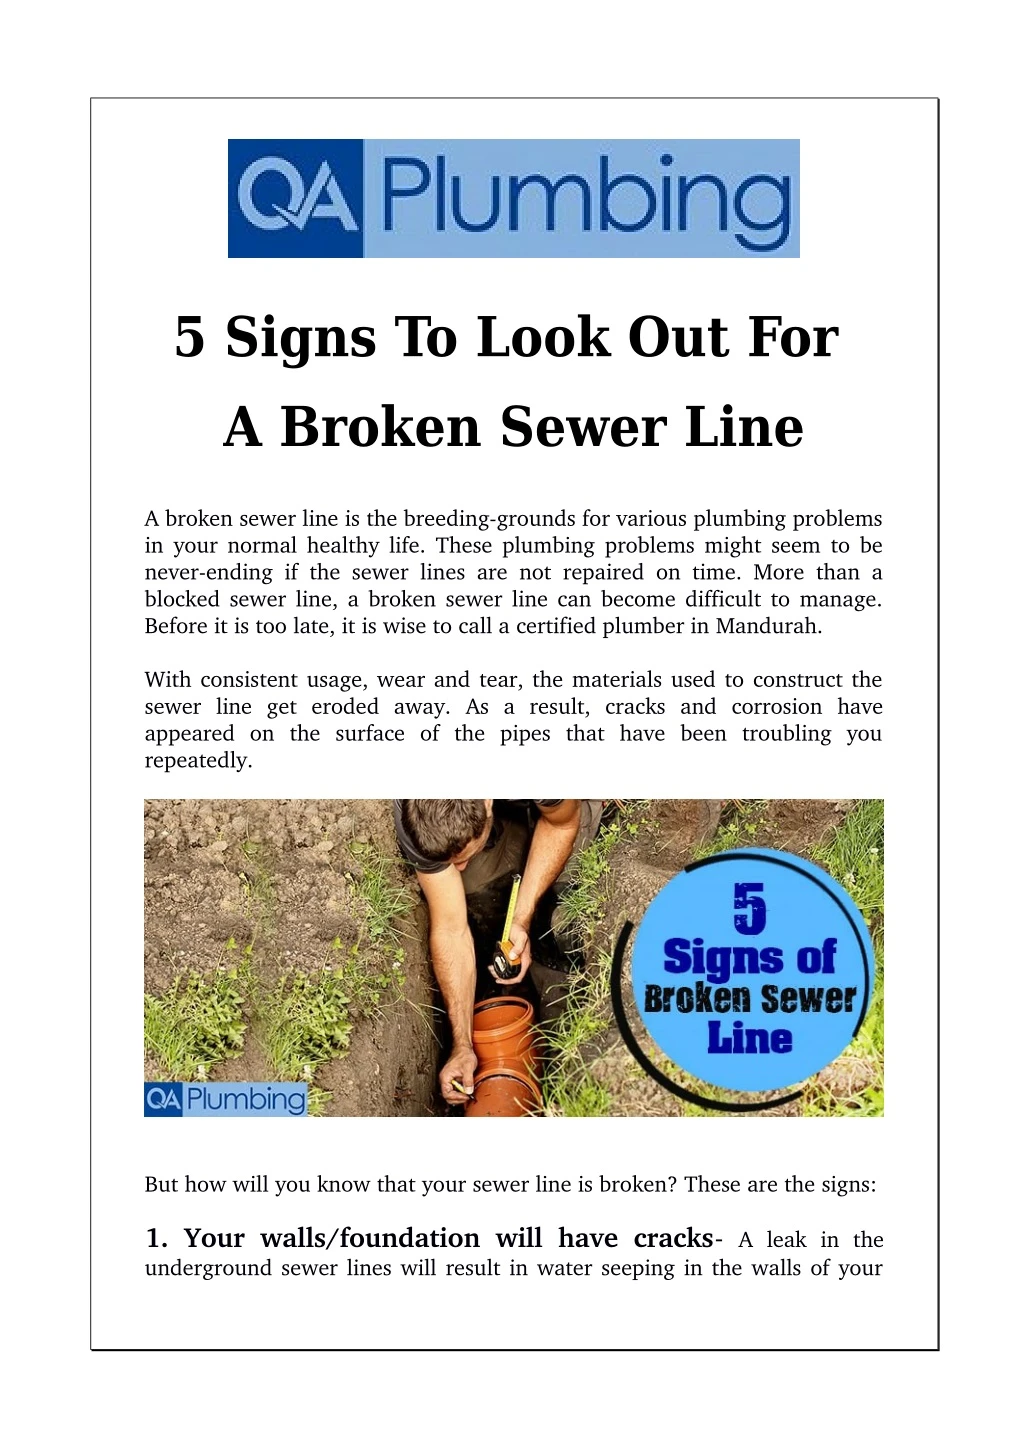 5 signs to look out for a broken sewer line